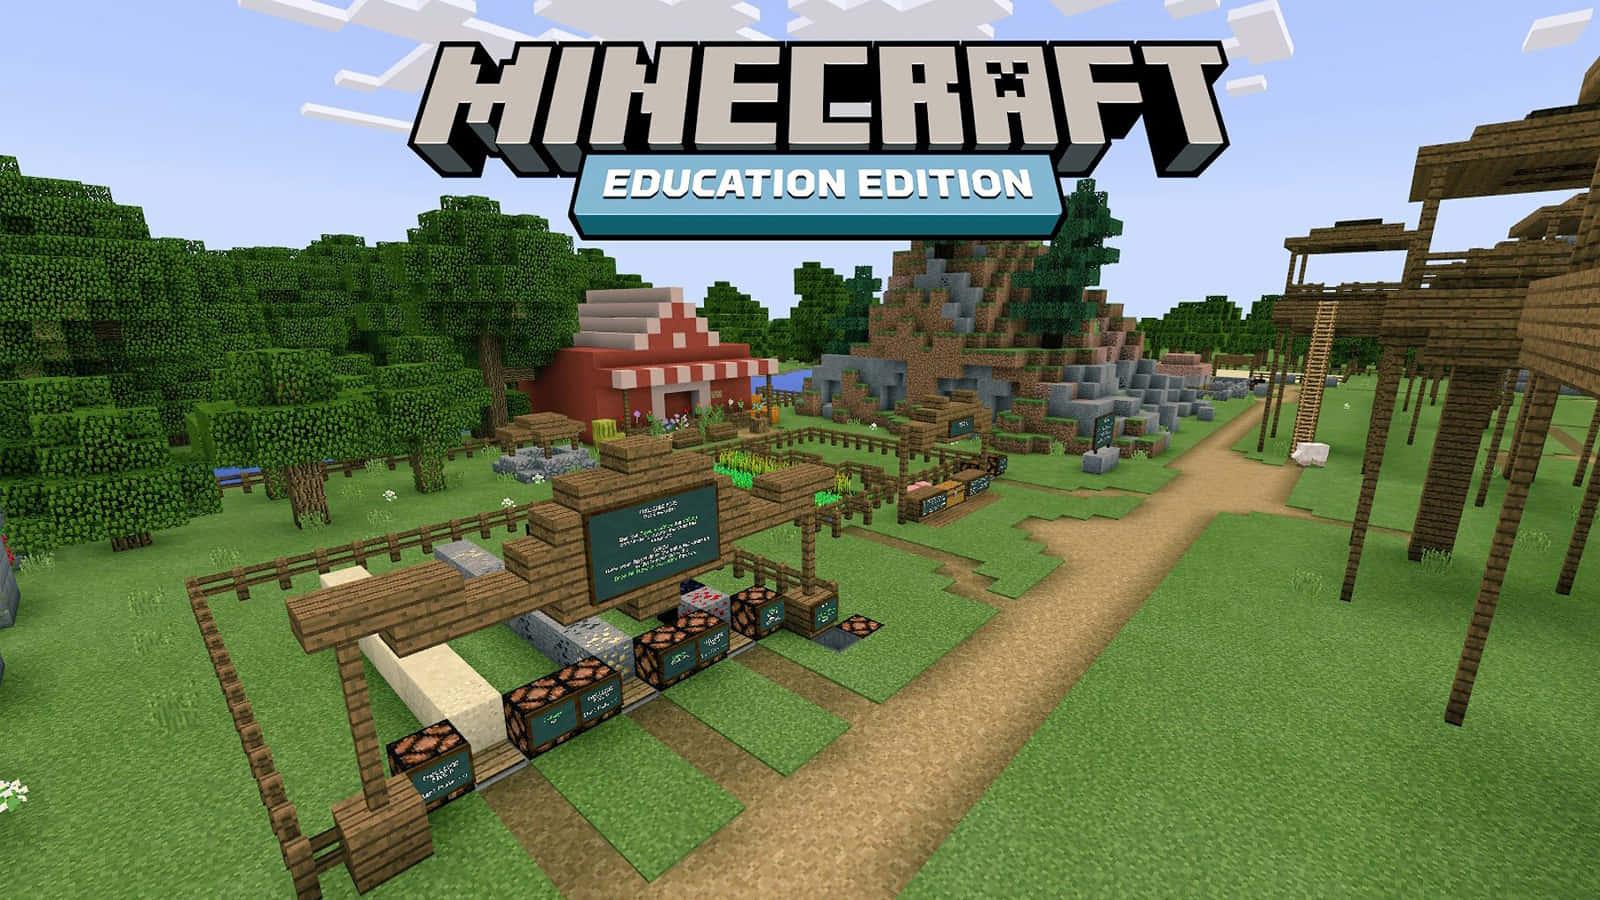 Students collaborating and building in Minecraft: Education Edition Wallpaper